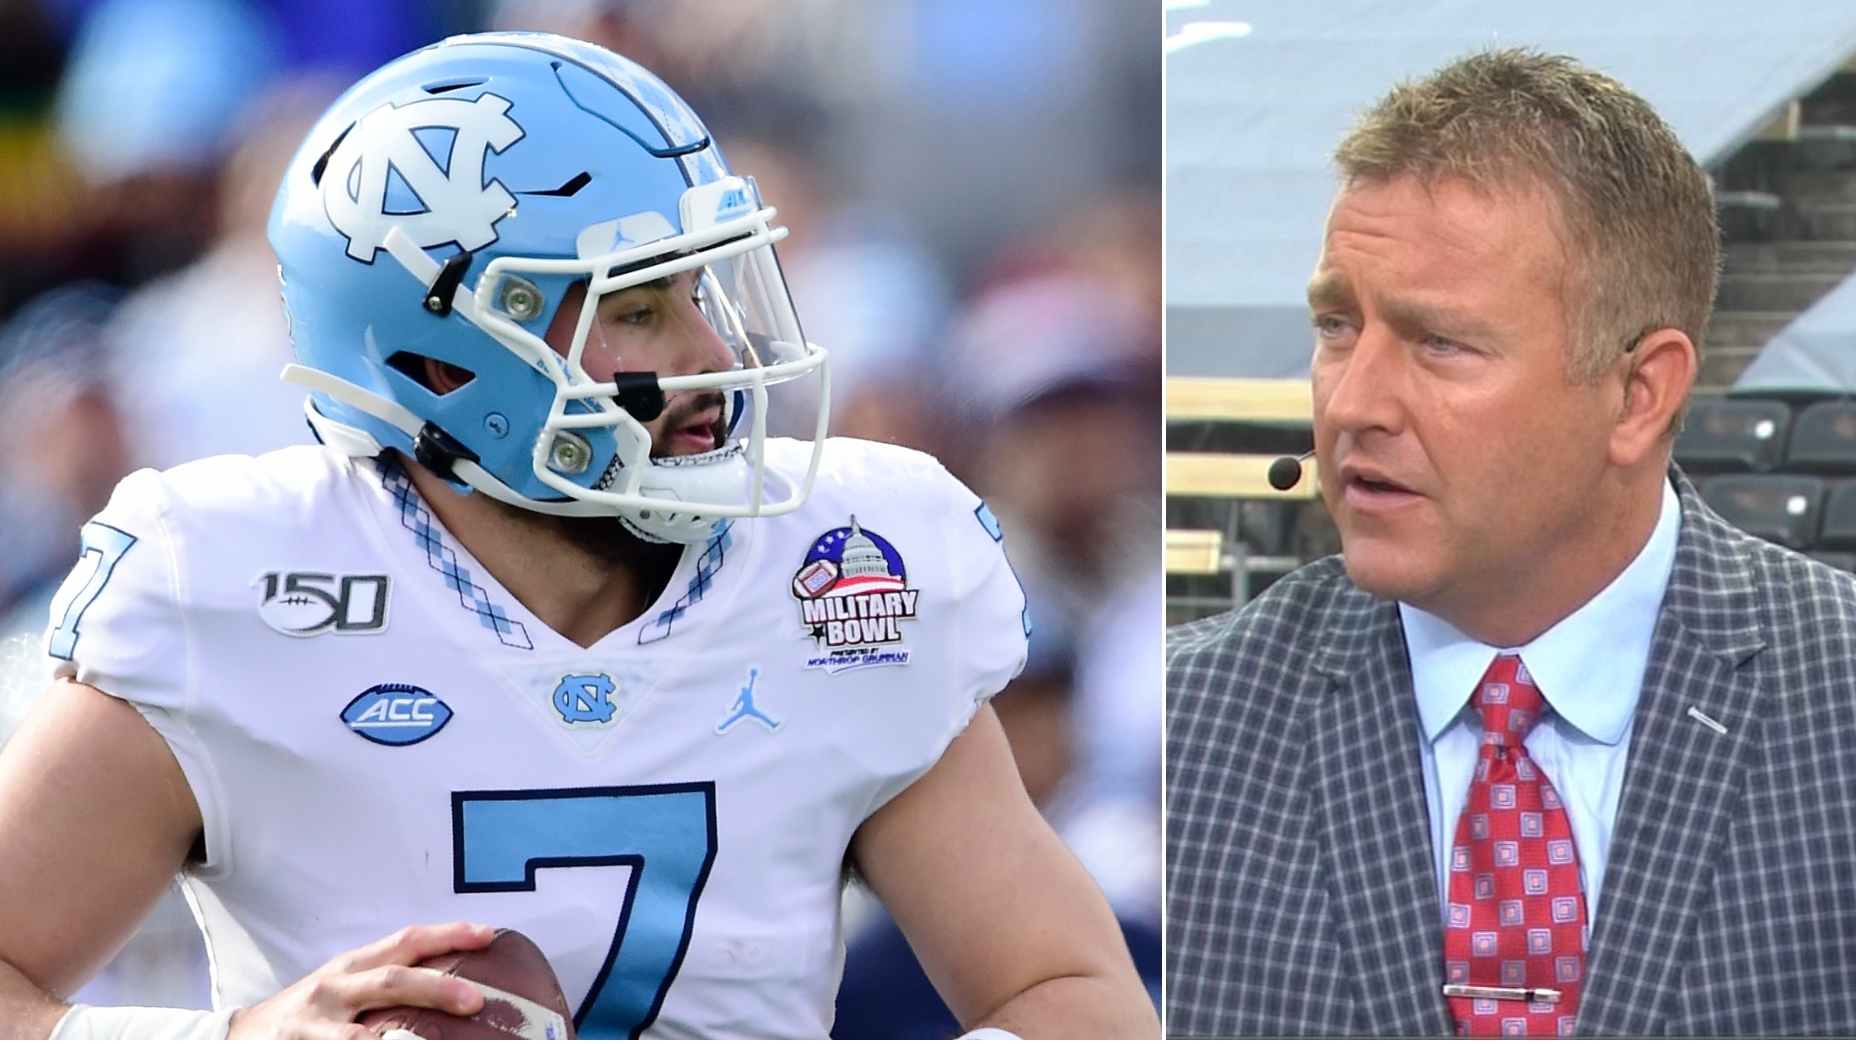 How successful will North Carolina's offense be this season?